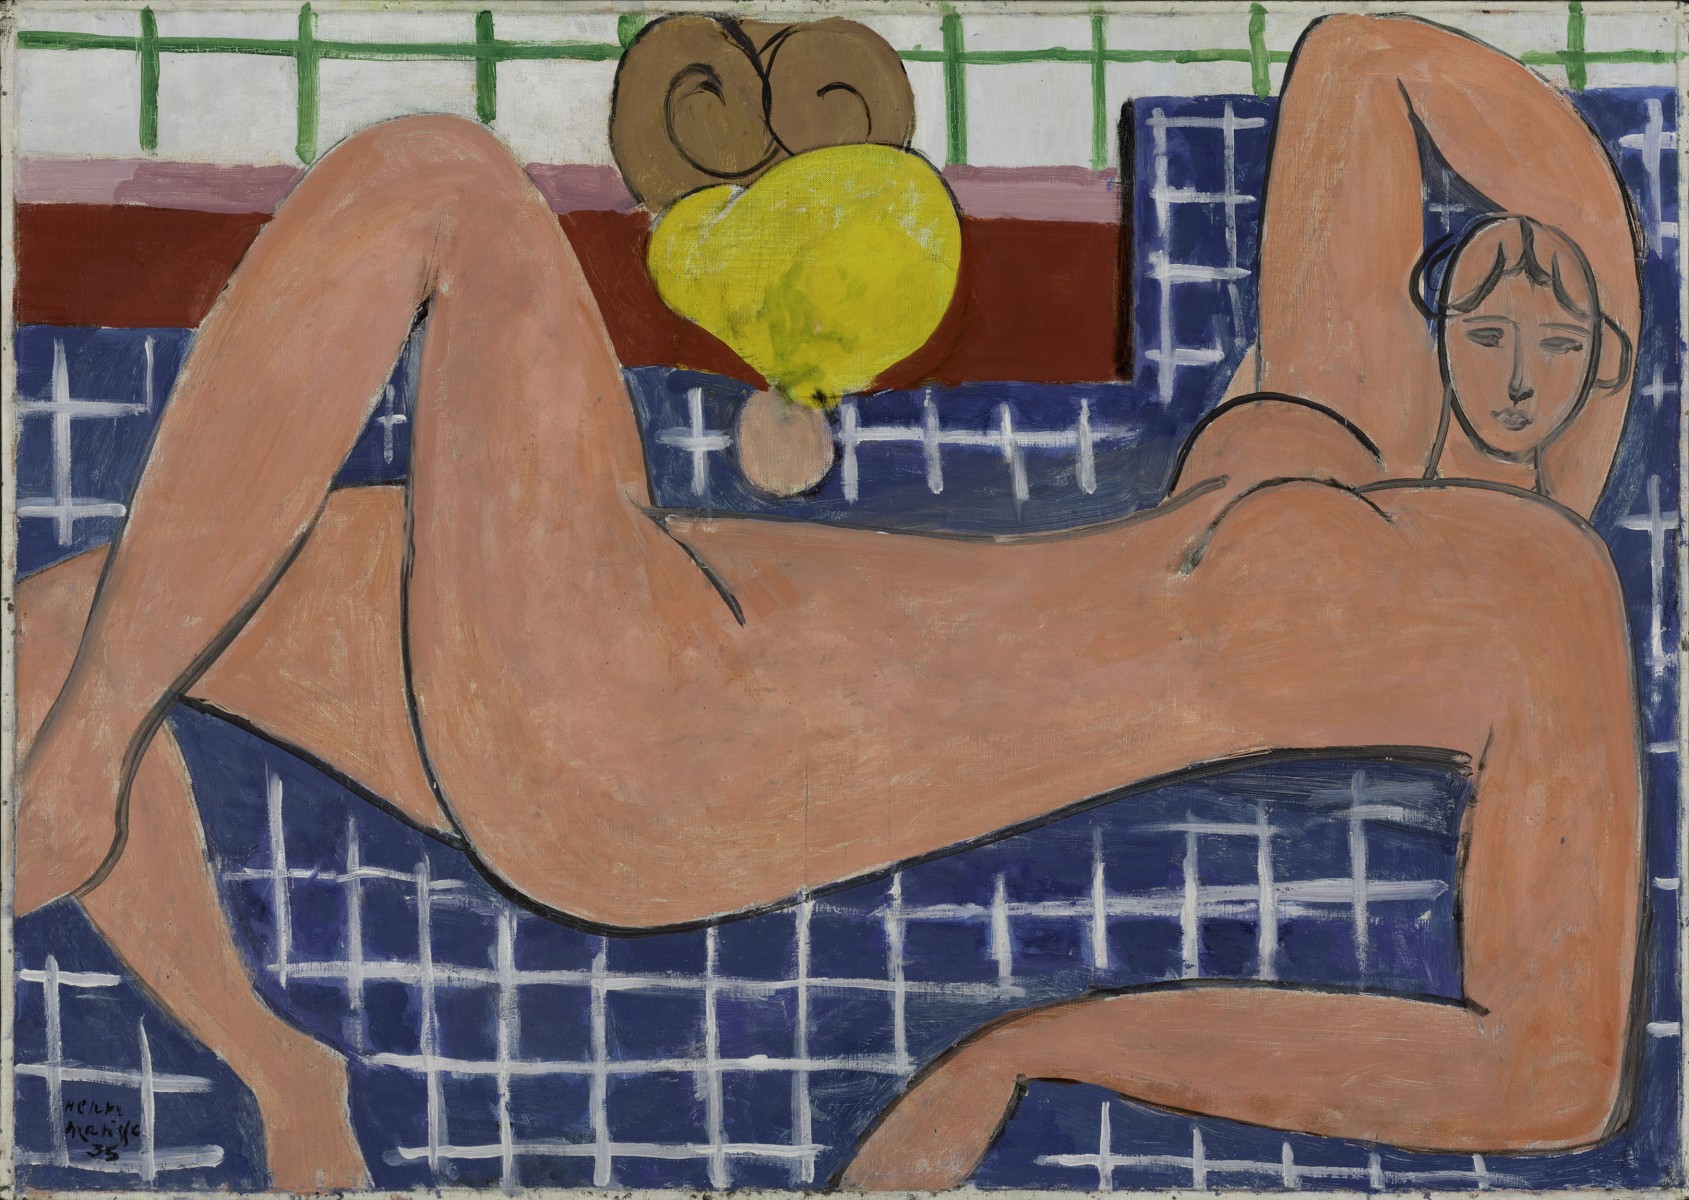 Henri Matisse "Large Reclining Nude" 1935. 26 1/8 × 36 3/4 inches (66.4 × 93.3 cm). Oil on canvas Baltimore Museum of Art: The Cone Collection, formed by Dr. Claribel Cone and Miss Etta Cone of Baltimore, Maryland, 1950.258. © 2022 Succession H. Matisse/Artists Rights Society (ARS), New York.